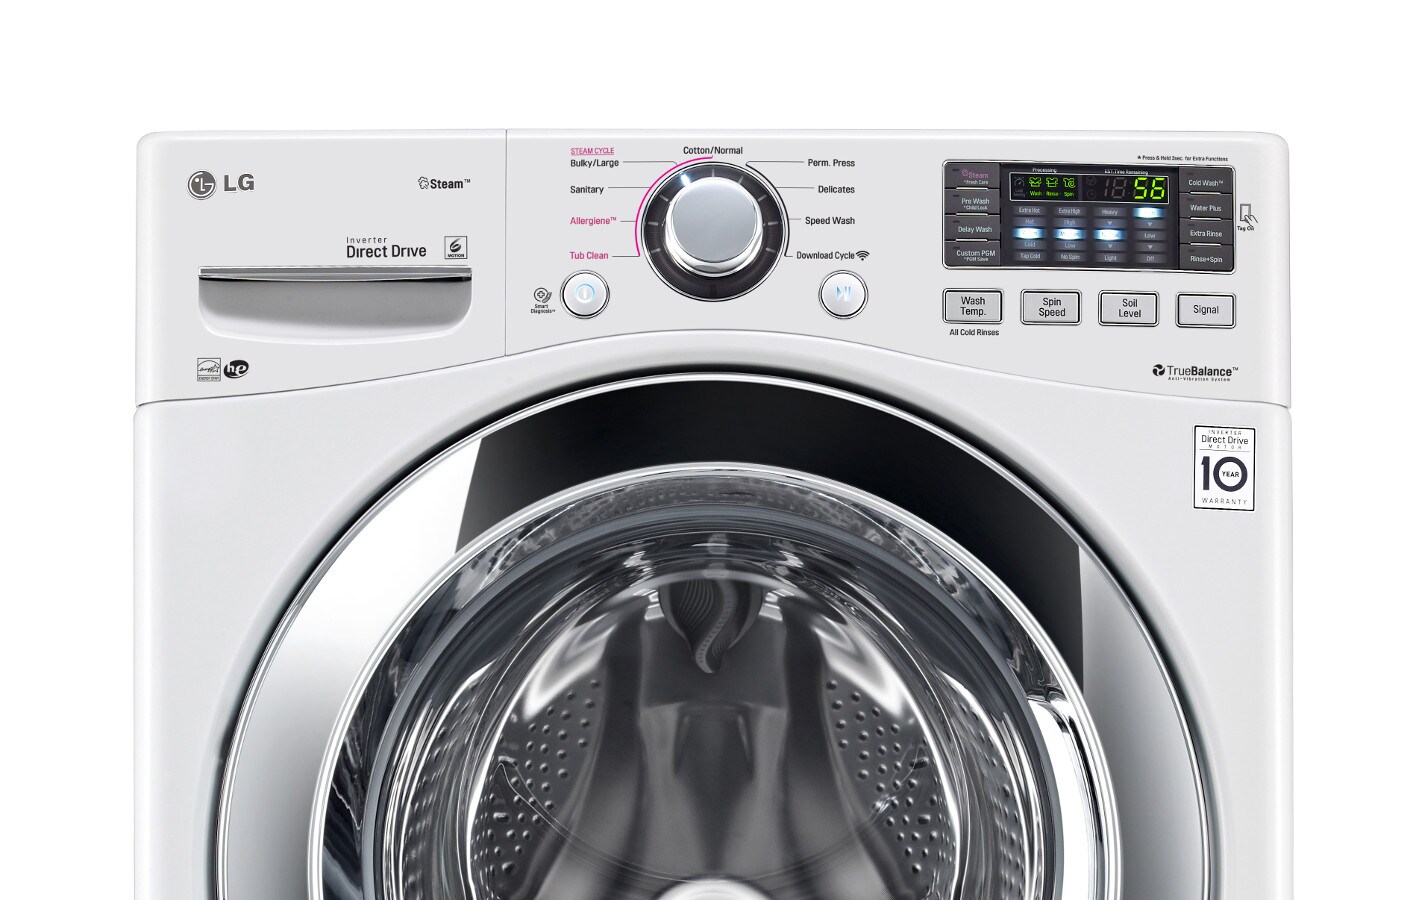 LG TurboWash 360 5-cu ft High Efficiency Stackable Steam Cycle Smart  Front-Load Washer (Black Steel) ENERGY STAR